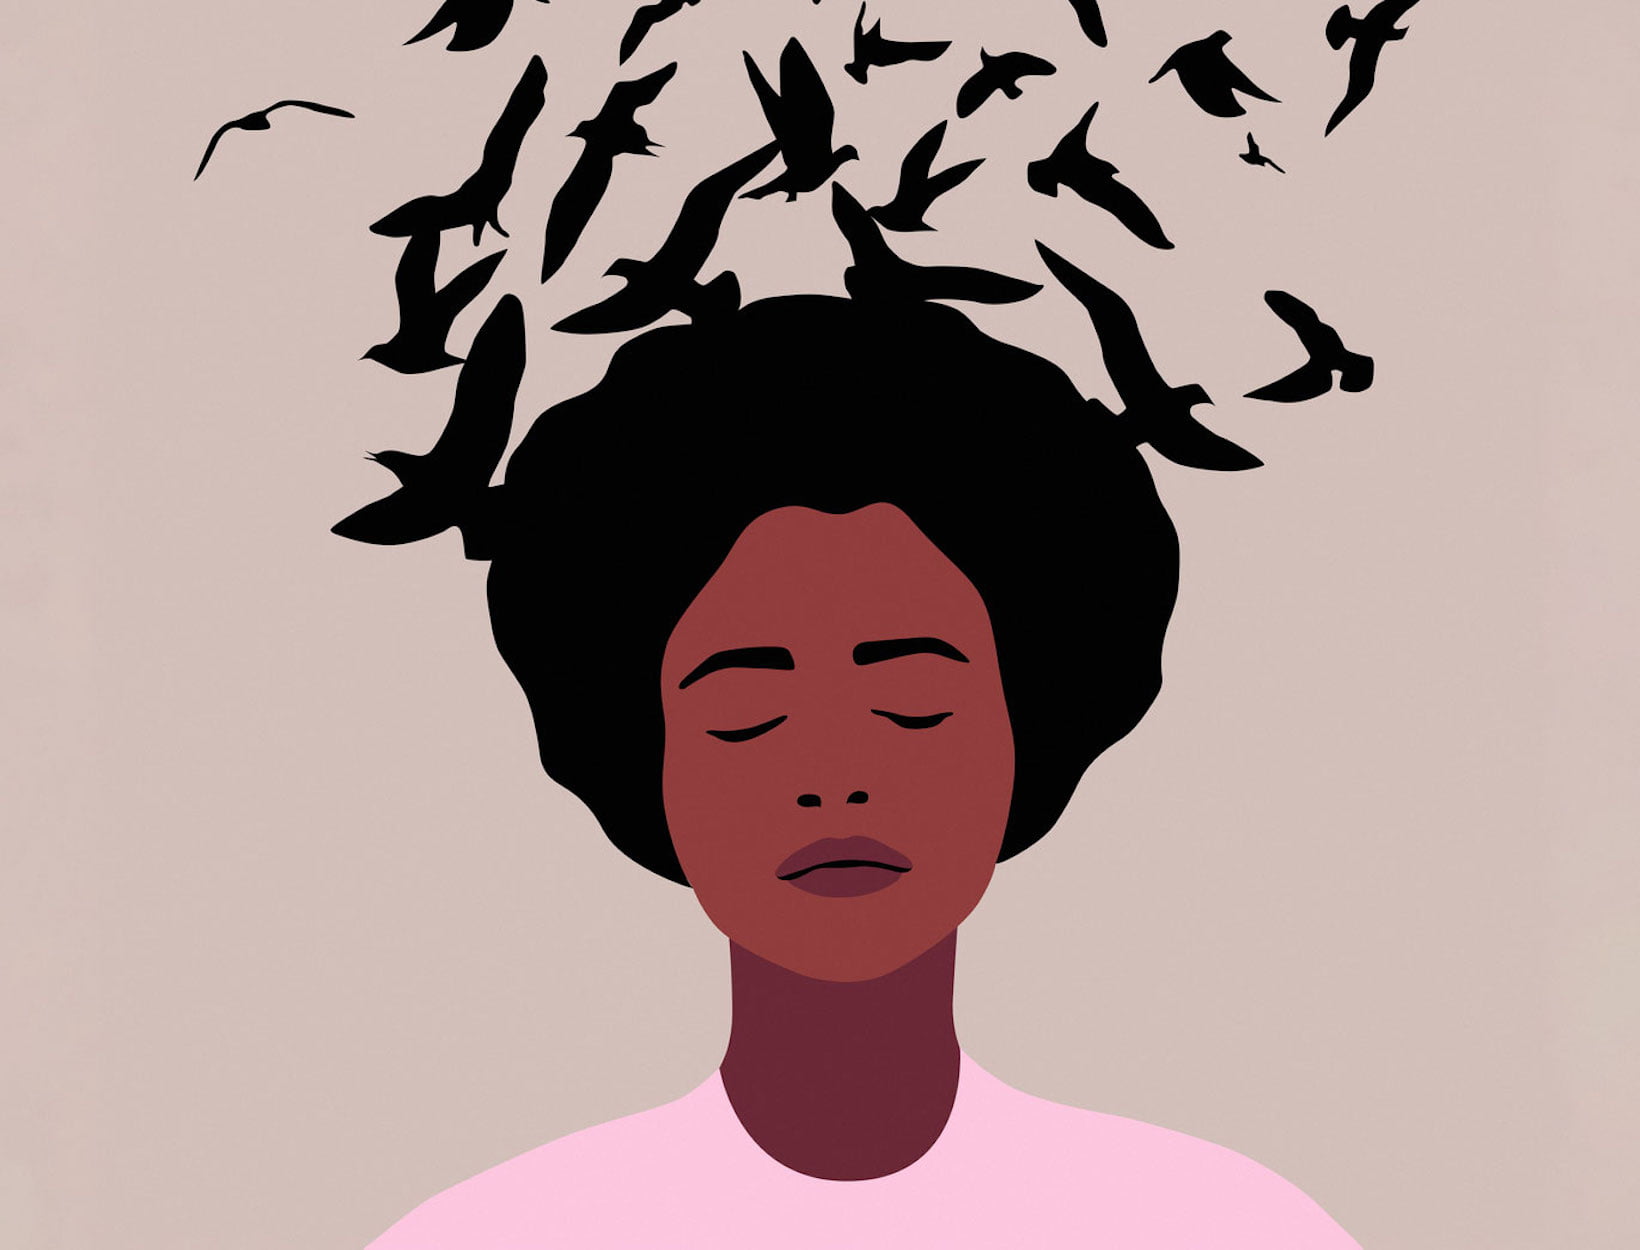 Illustration of a Black woman with birds behind her